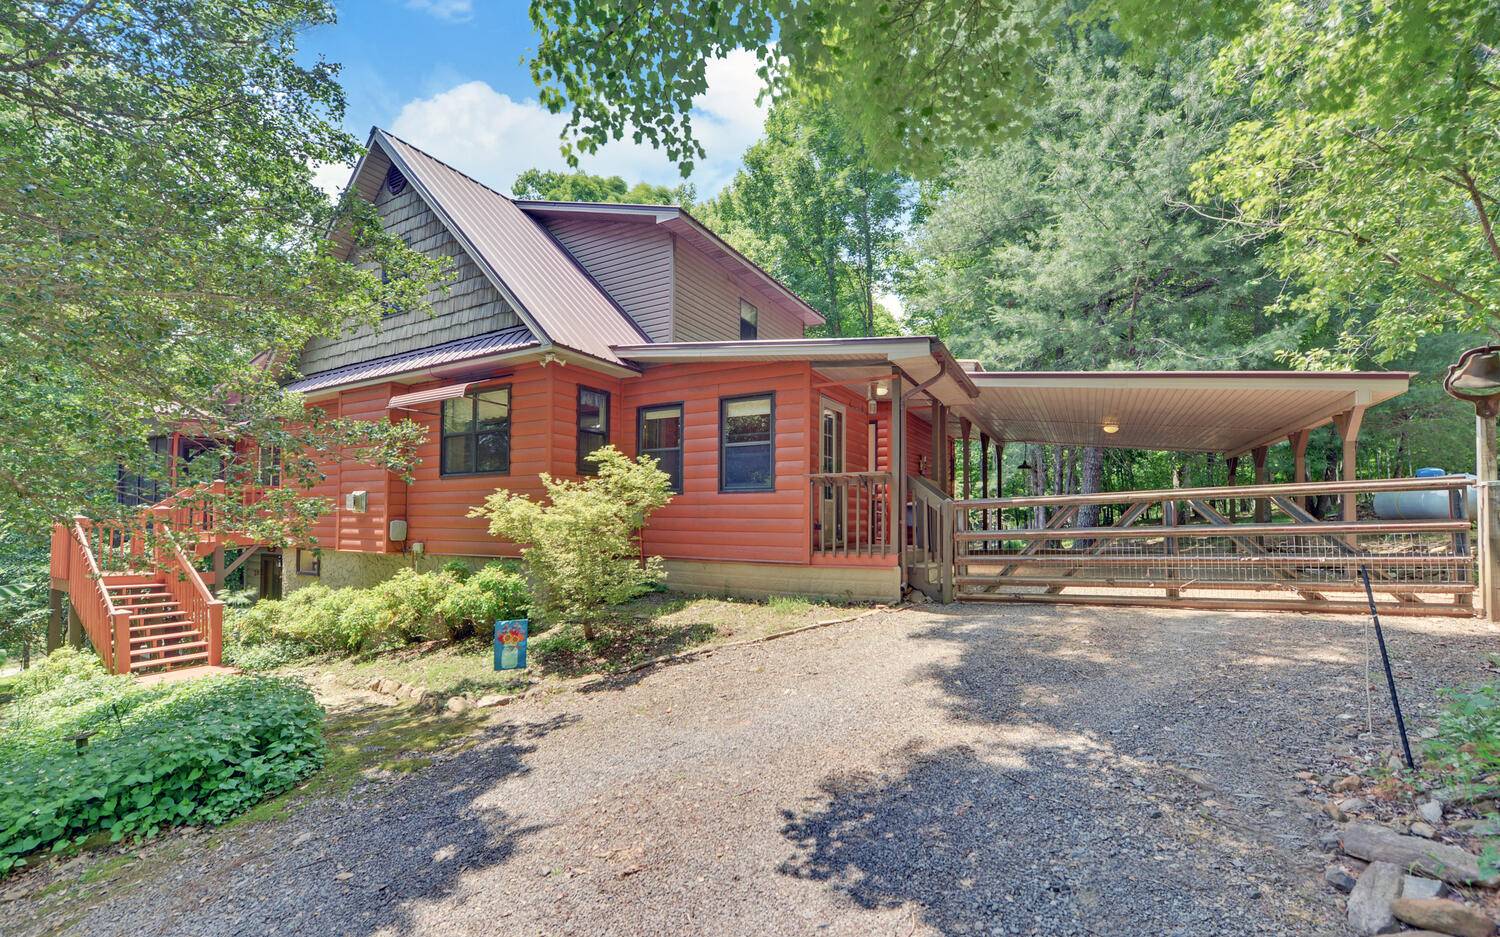 If you're looking for a family home in the country then look no further! This solid log home has a finished interior, master on the main level, country kitchen, a huge walk-in pantry, A 12 ft screened porch, heated floors in the master en suite, full mother-in-law suite with a separate entrance, walk-in closets and much more! Outside you'll find an RV shed with power, barn with workshop area and storage loft, and a fenced garden area with established berry bushes. Located in the country and private but not too far out of town. The finished terrace level could be a long or short term rental to generate income. No restrictions! Home has ETC fiber optic internet for you work at homers and gamers!